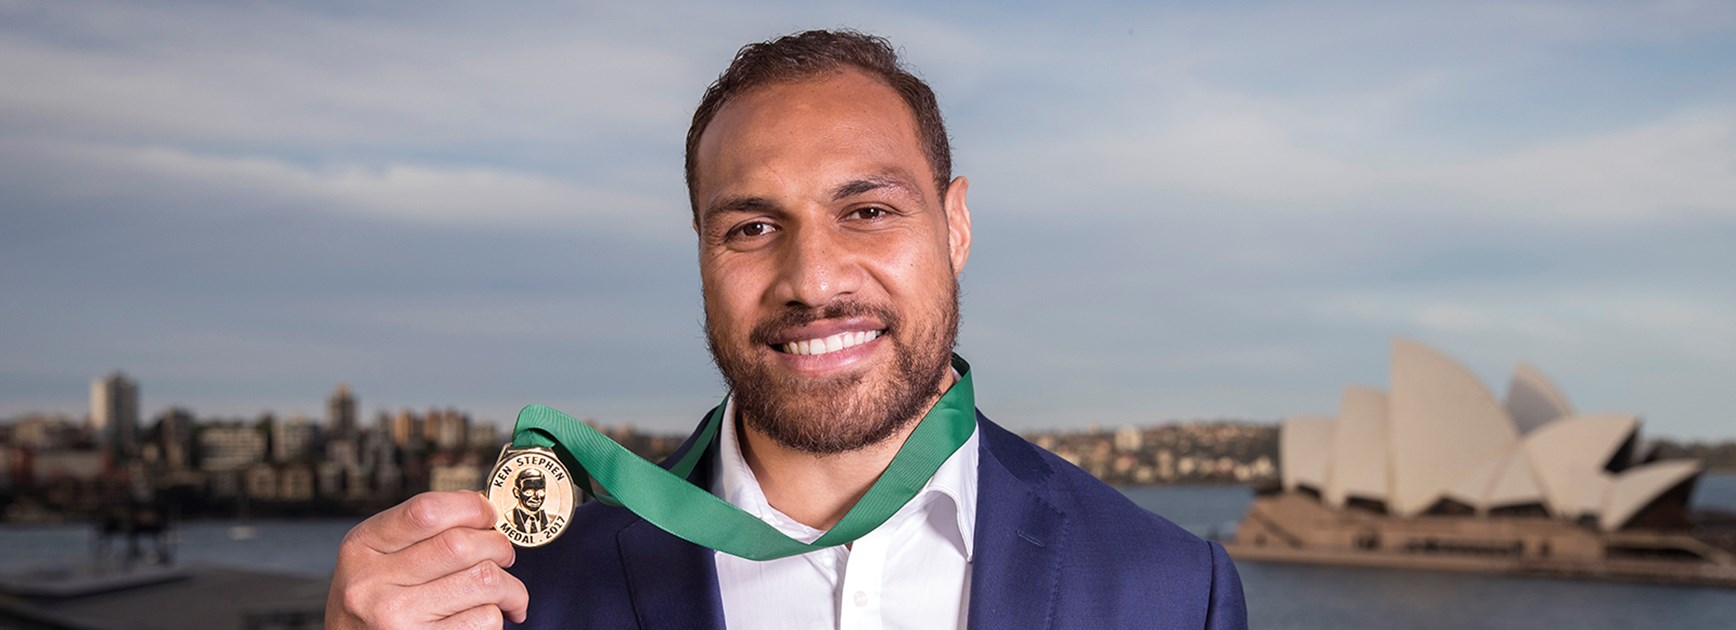 Cronulla Sharks forward Sam Tagataese has been awarded the 2017 Ken Stephen Medal for service to community.